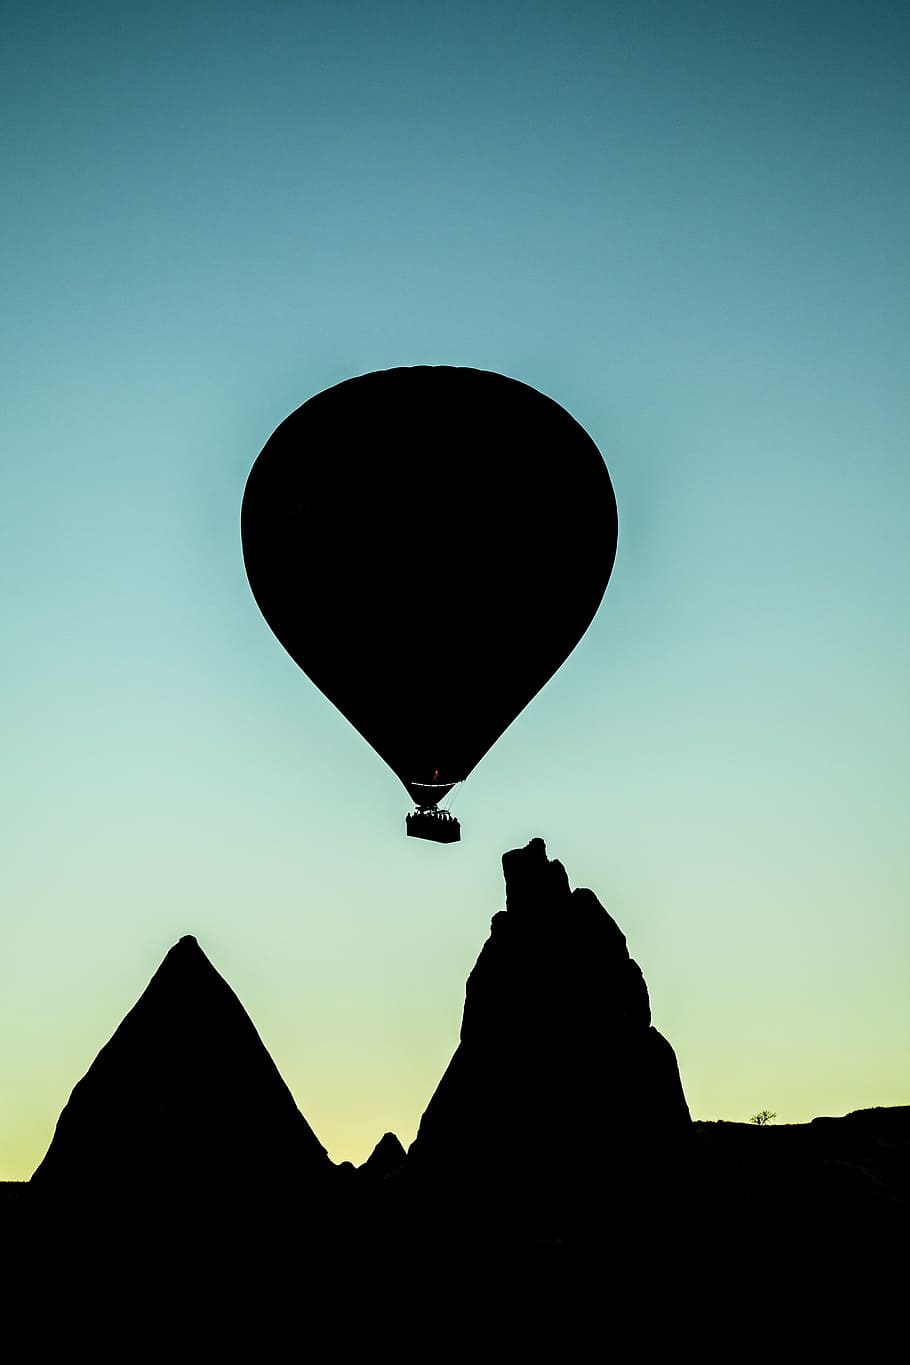 silhouette, hot, air balloon, flying, distance, mountains, blue, hour, balloon, travel